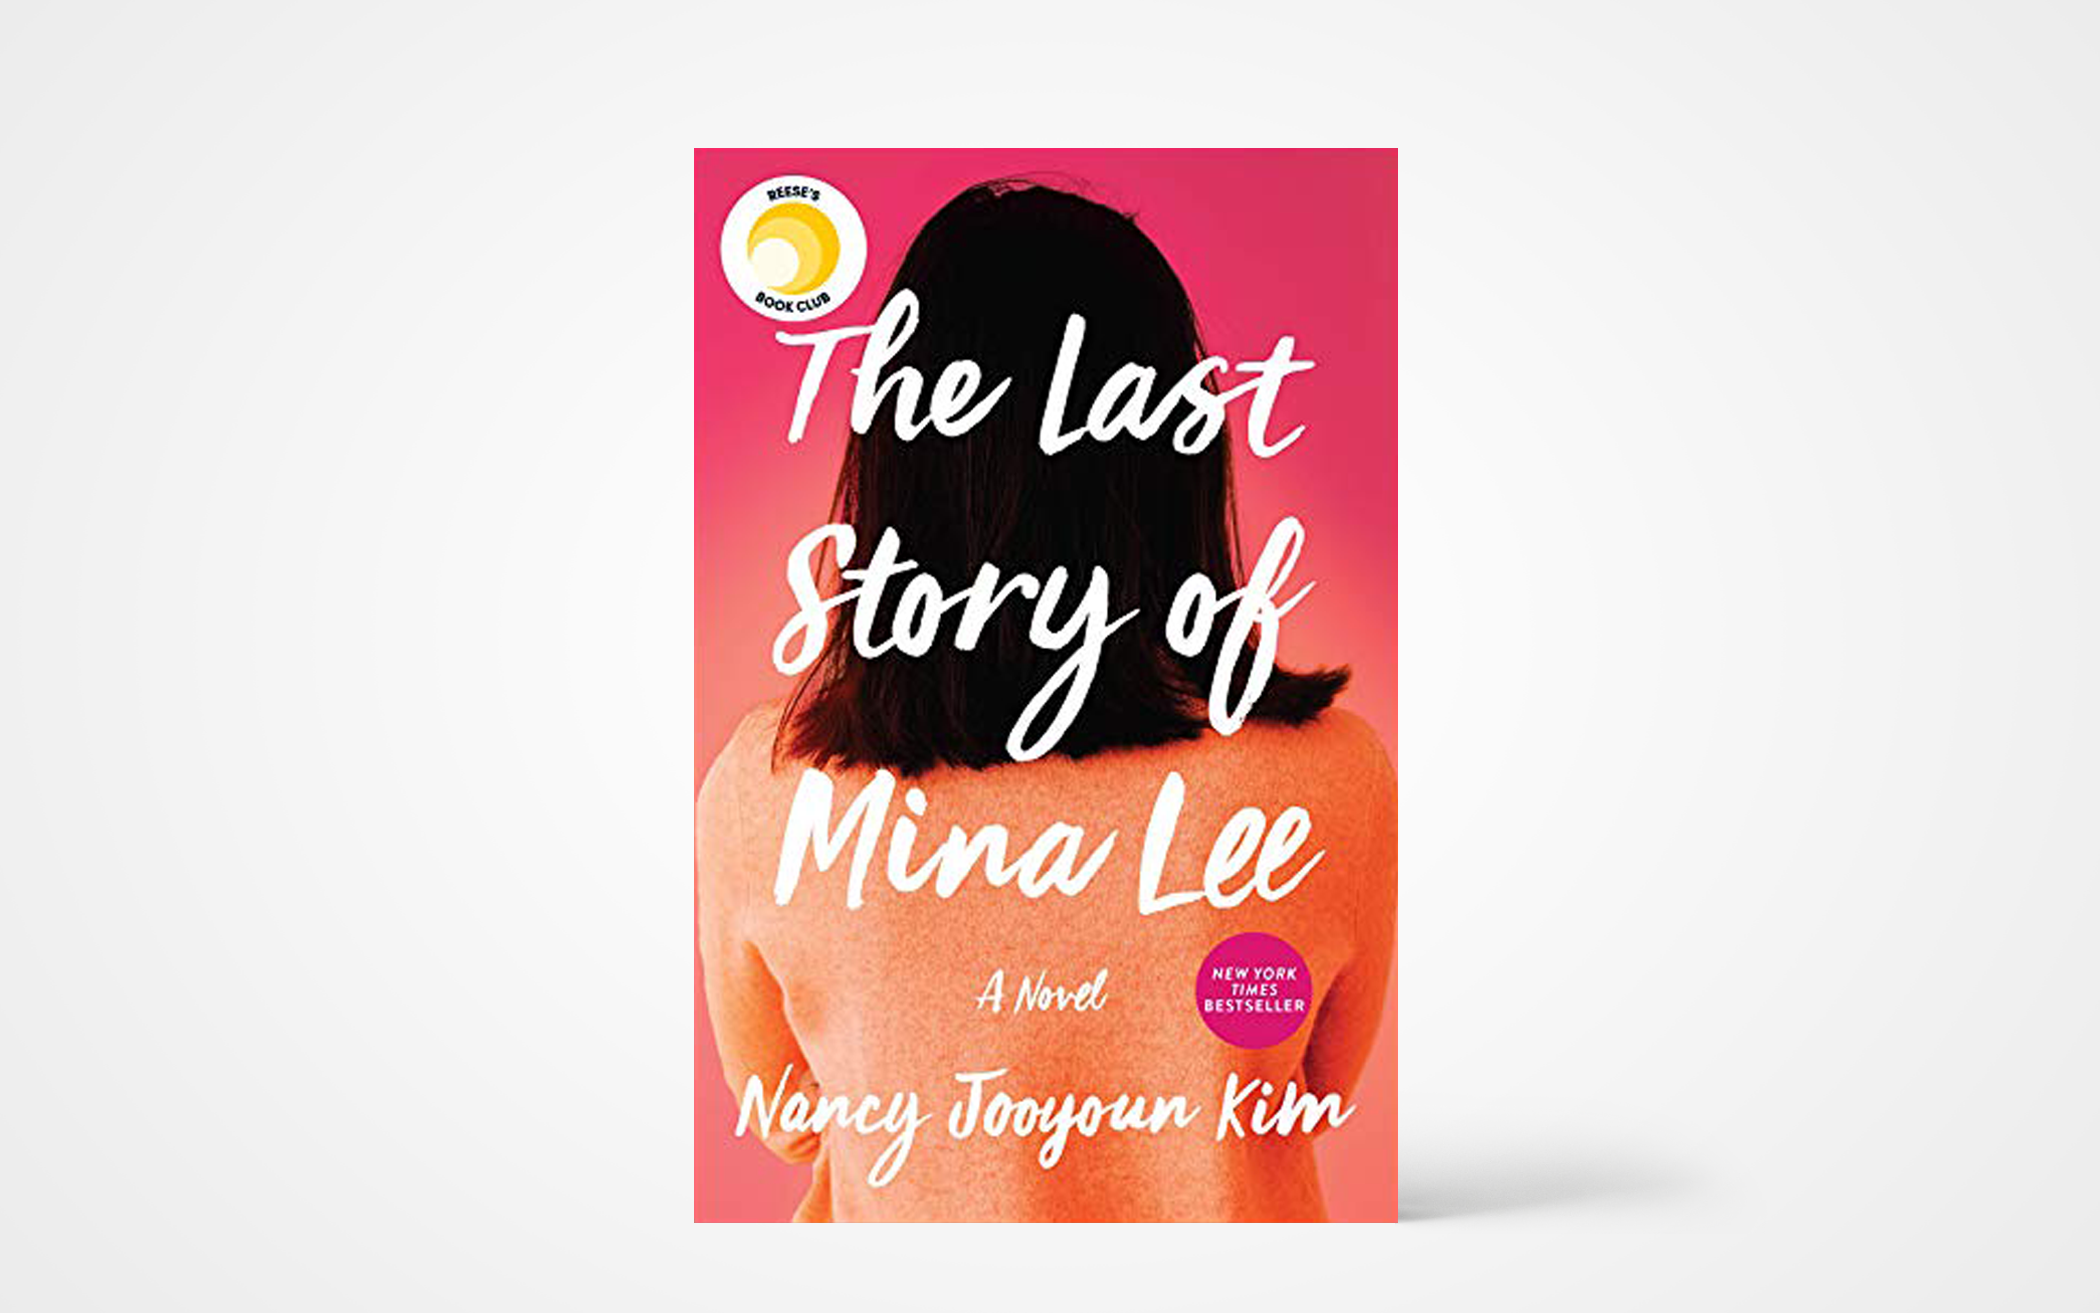 The Last Story of Mina Lee | The Banner